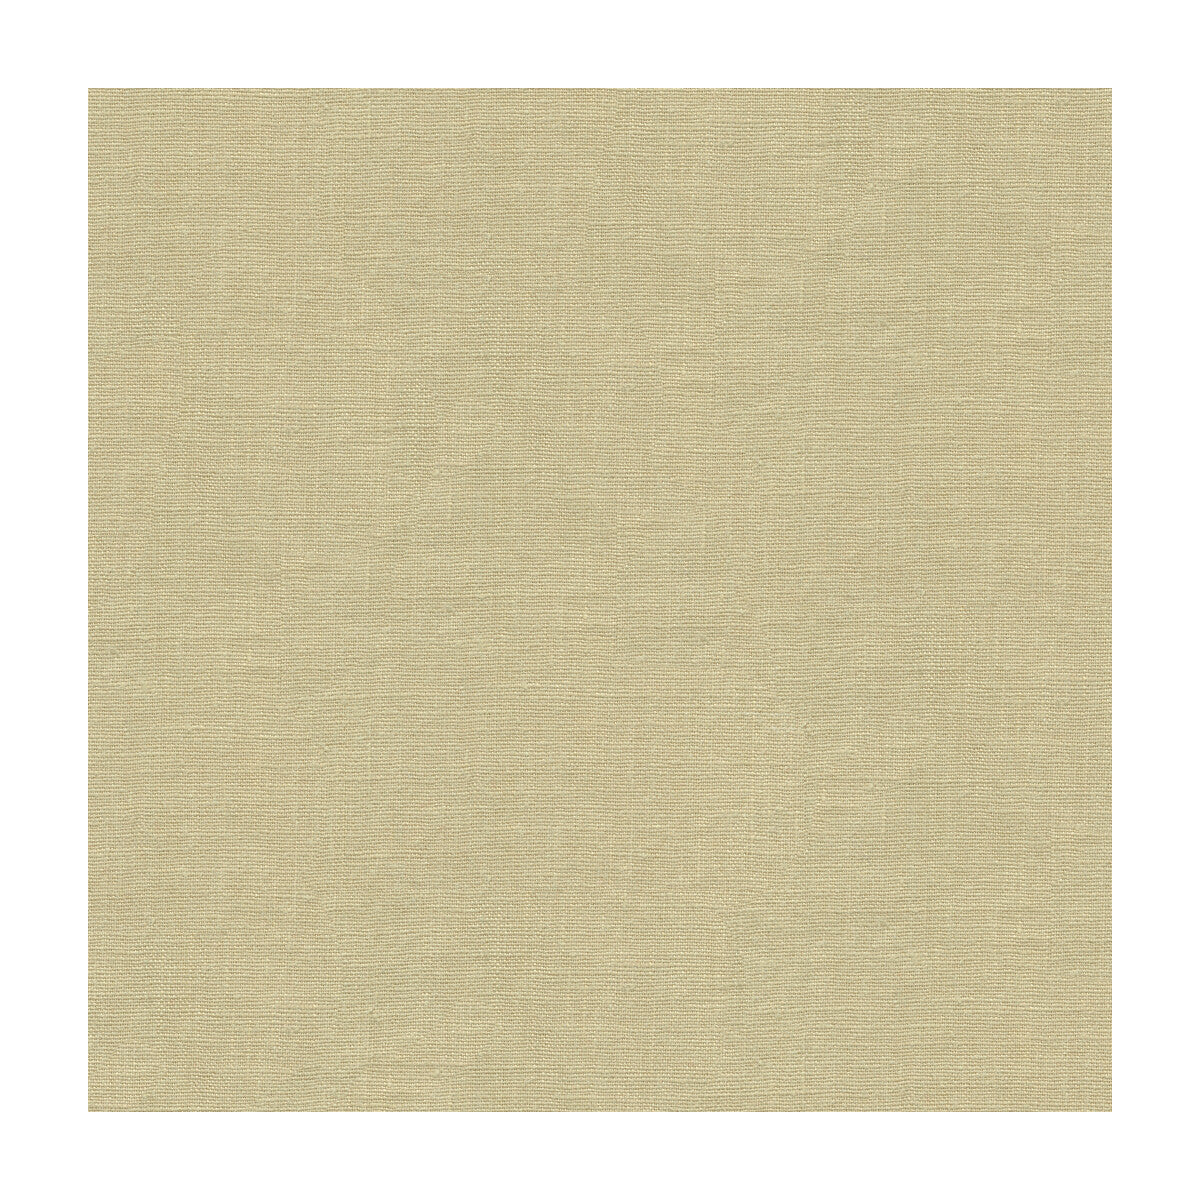 Dublin fabric in natural color - pattern 32344.616.0 - by Kravet Basics in the Perfect Plains collection